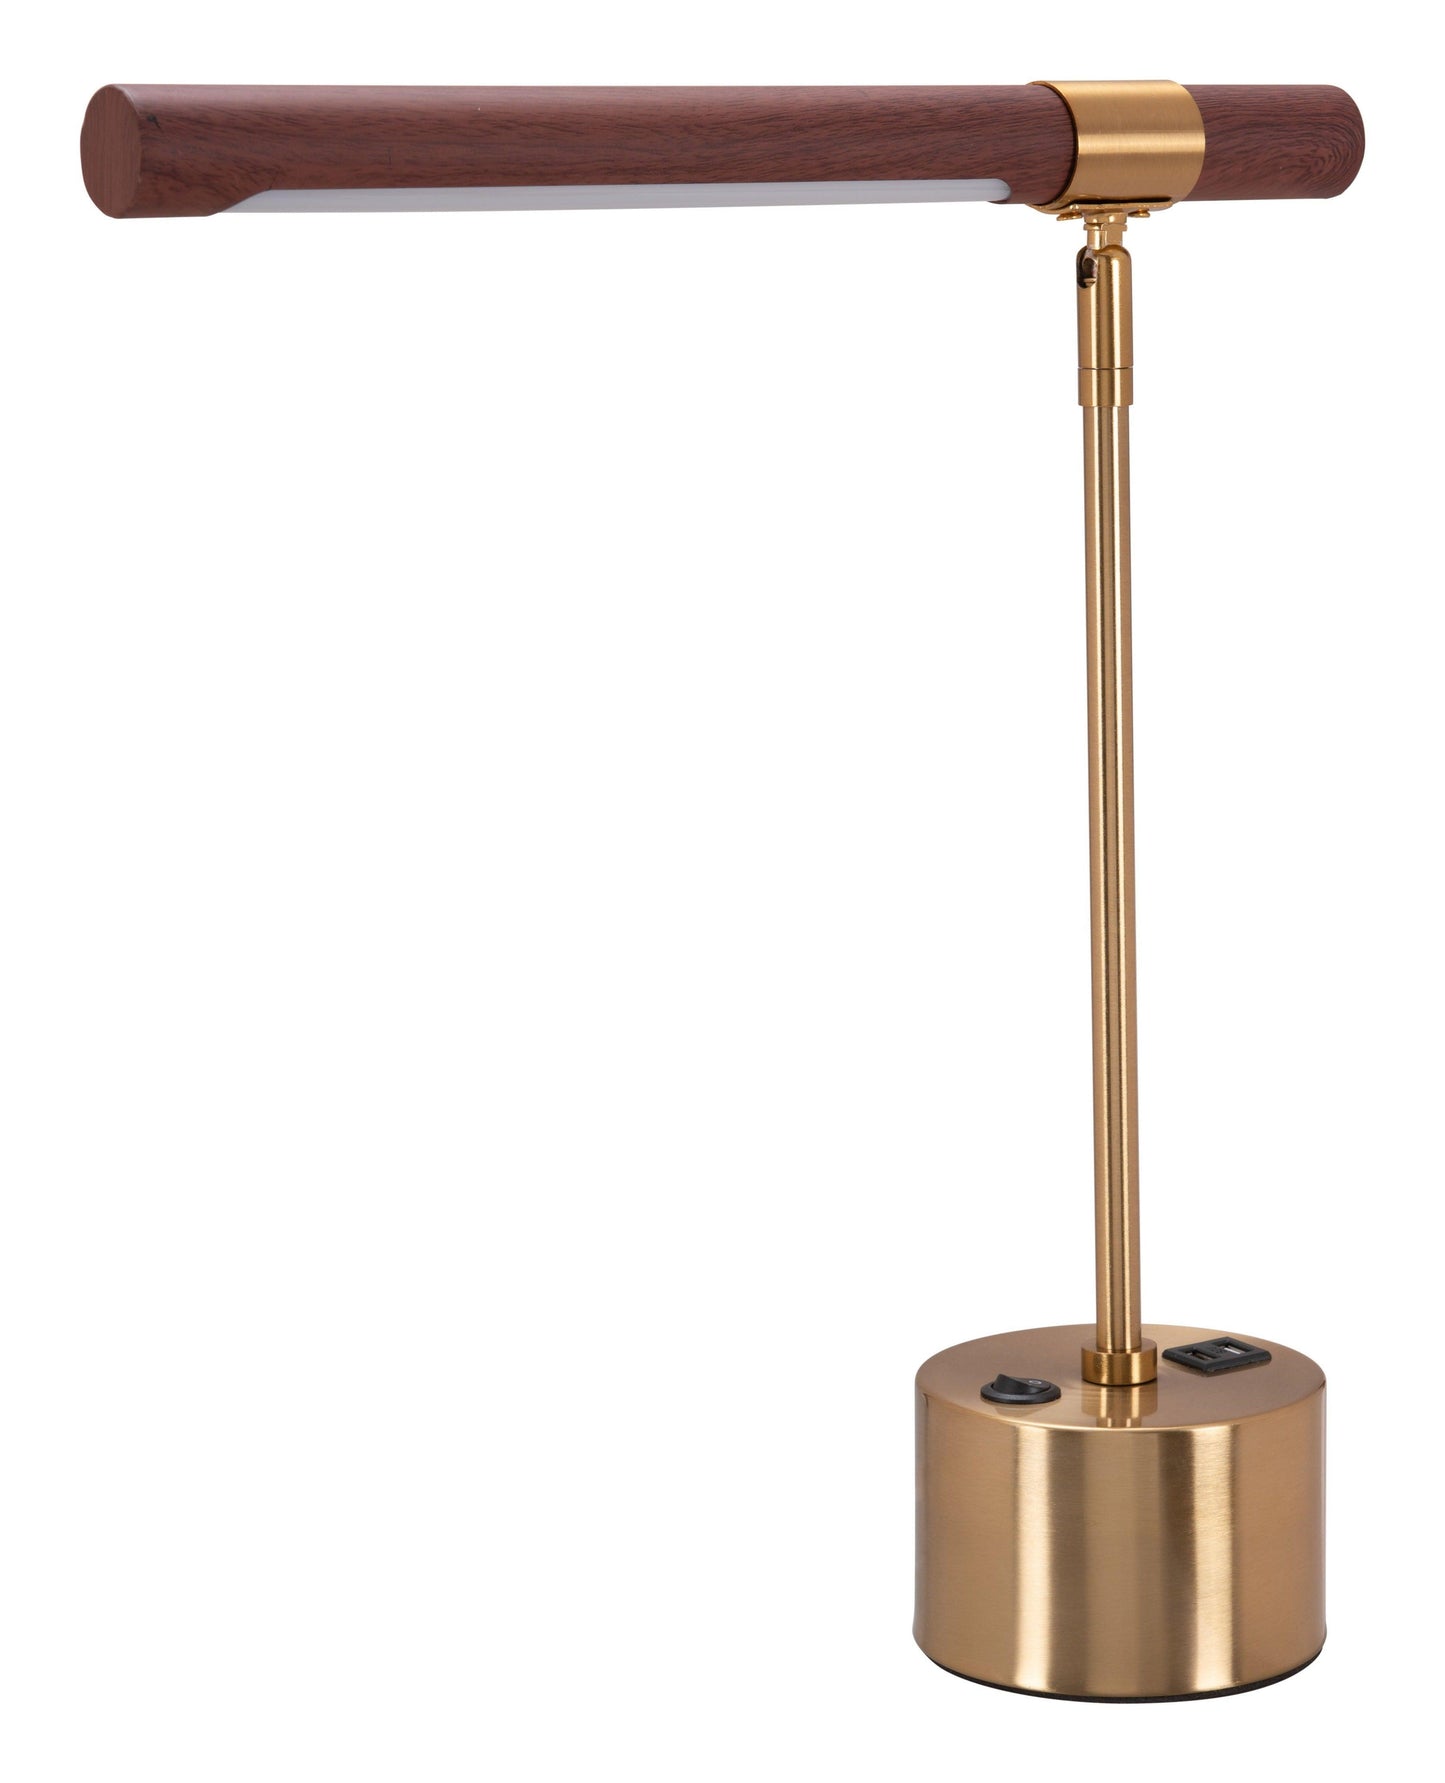 Kippy Table Lamp Brown & Brass - Sideboards and Things Accents_Brass, Brand_Zuo Modern, Color_Brown, Depth_0-10, Features_Adjustable, Finish_Hand Painted, Finish_Polished, Height_10-20, Materials_Metal, Metal Type_Steel, Product Type_Table Lamp, Width_10-20